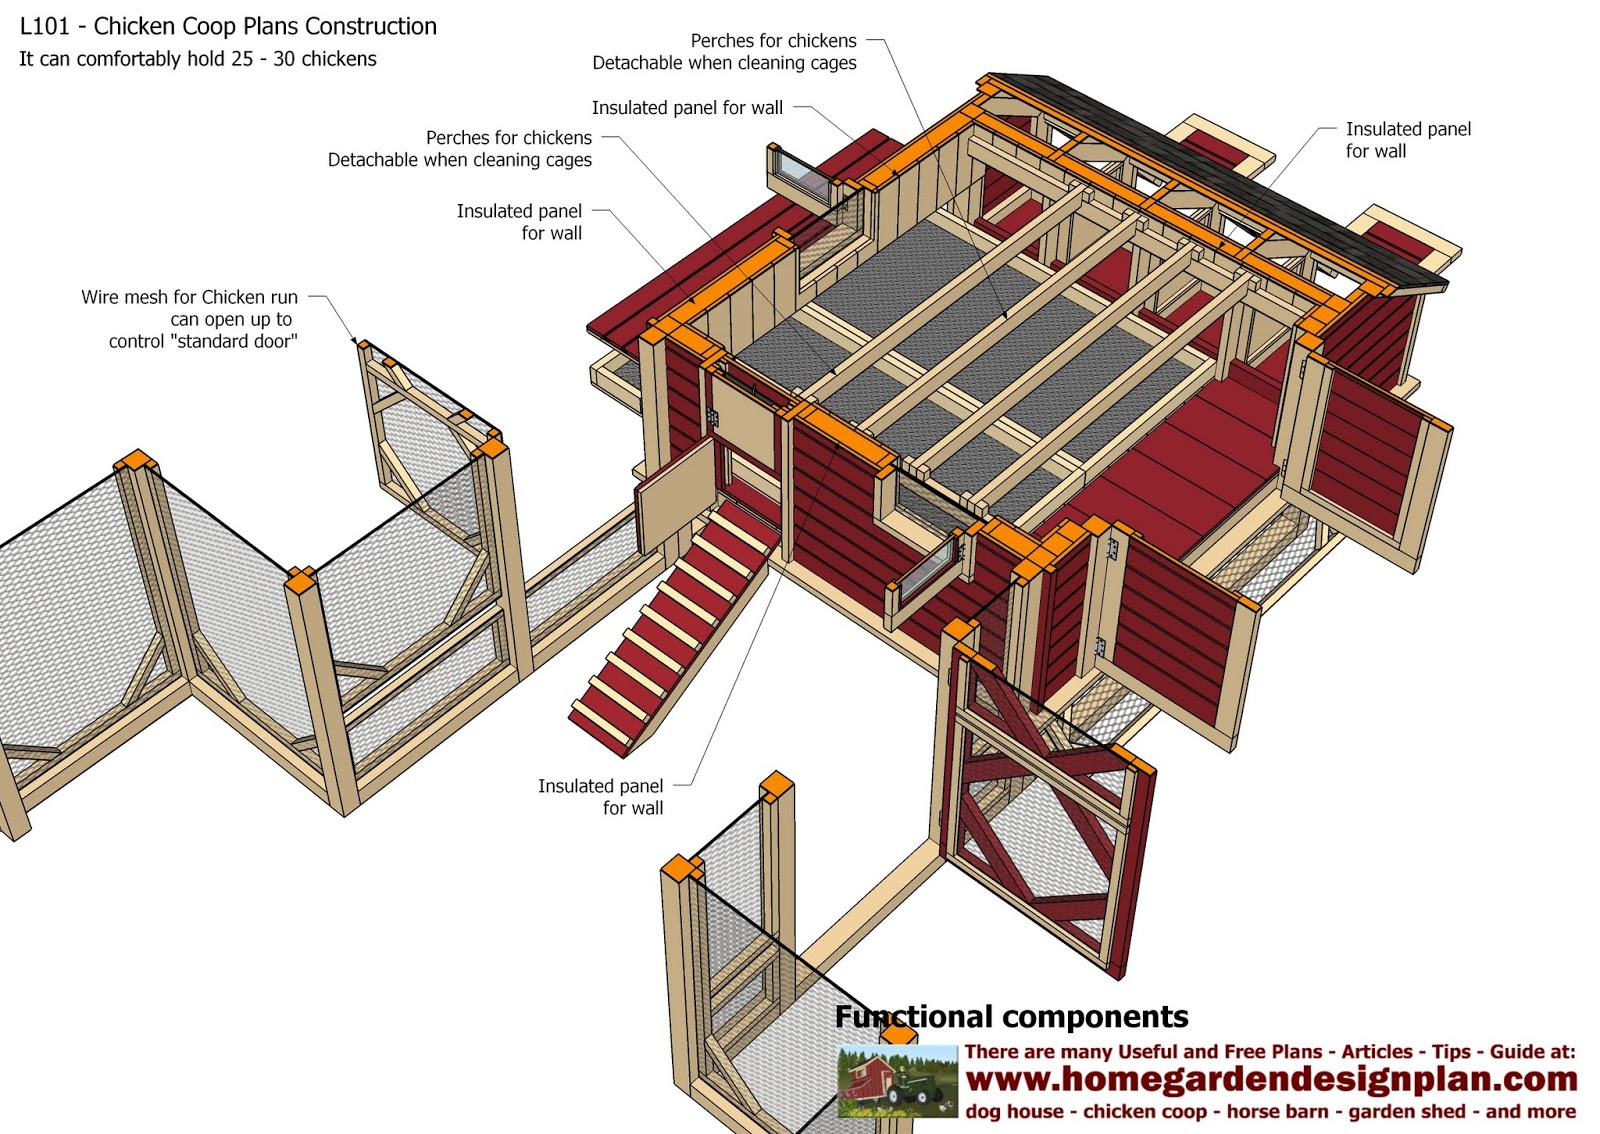 Chicken Coop Design - How To Build An Insulated Chicken Coop